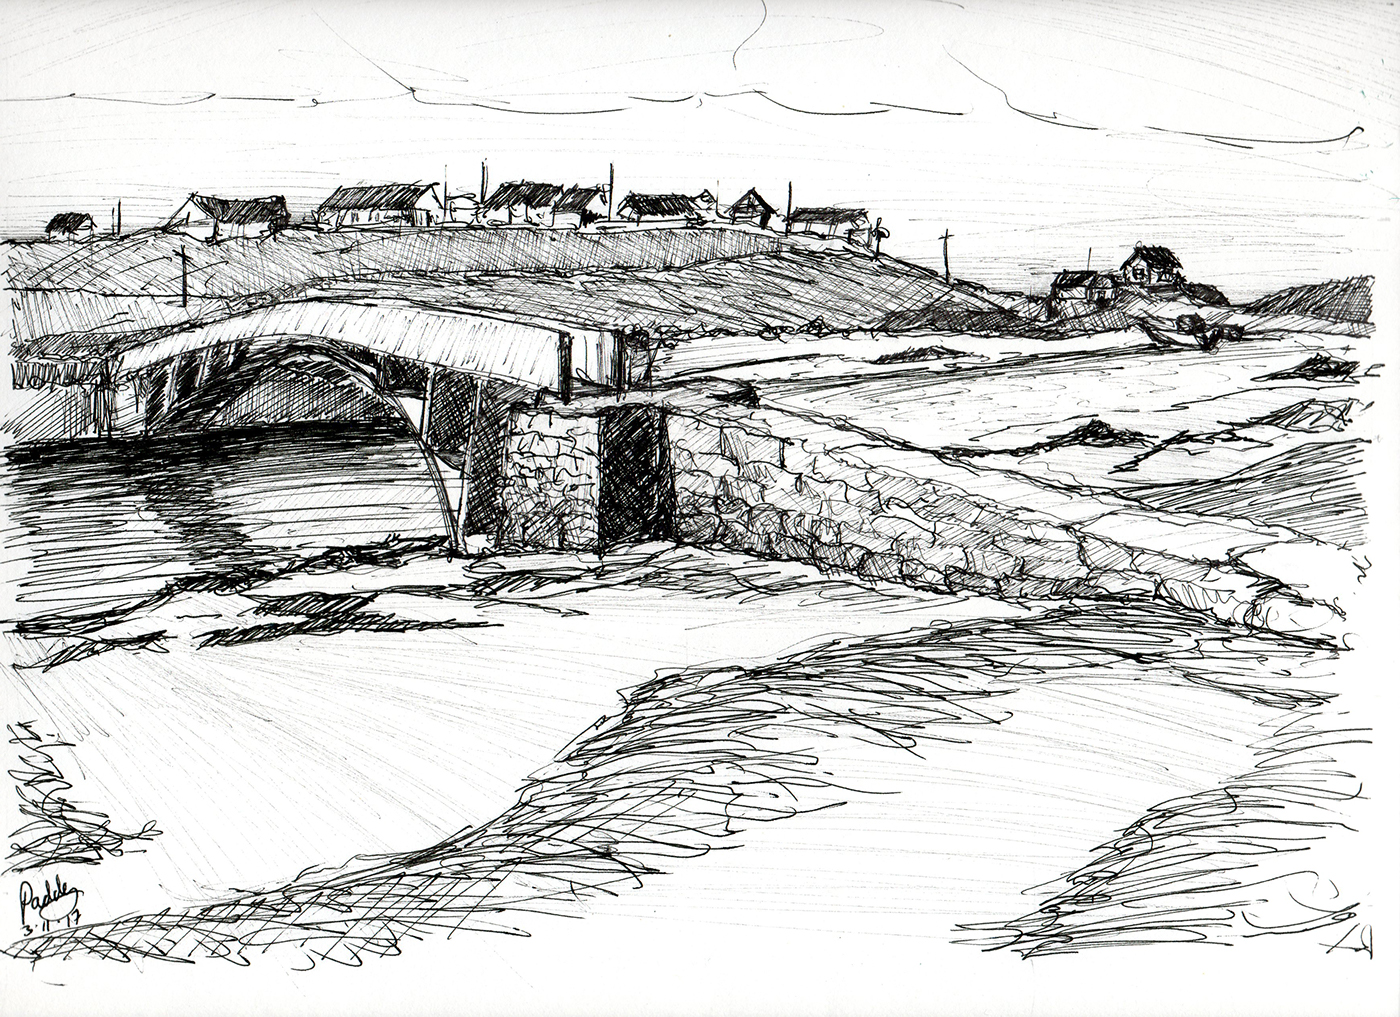 pen and ink Donegal Ireland Cruit Island www.paddybreslin.com